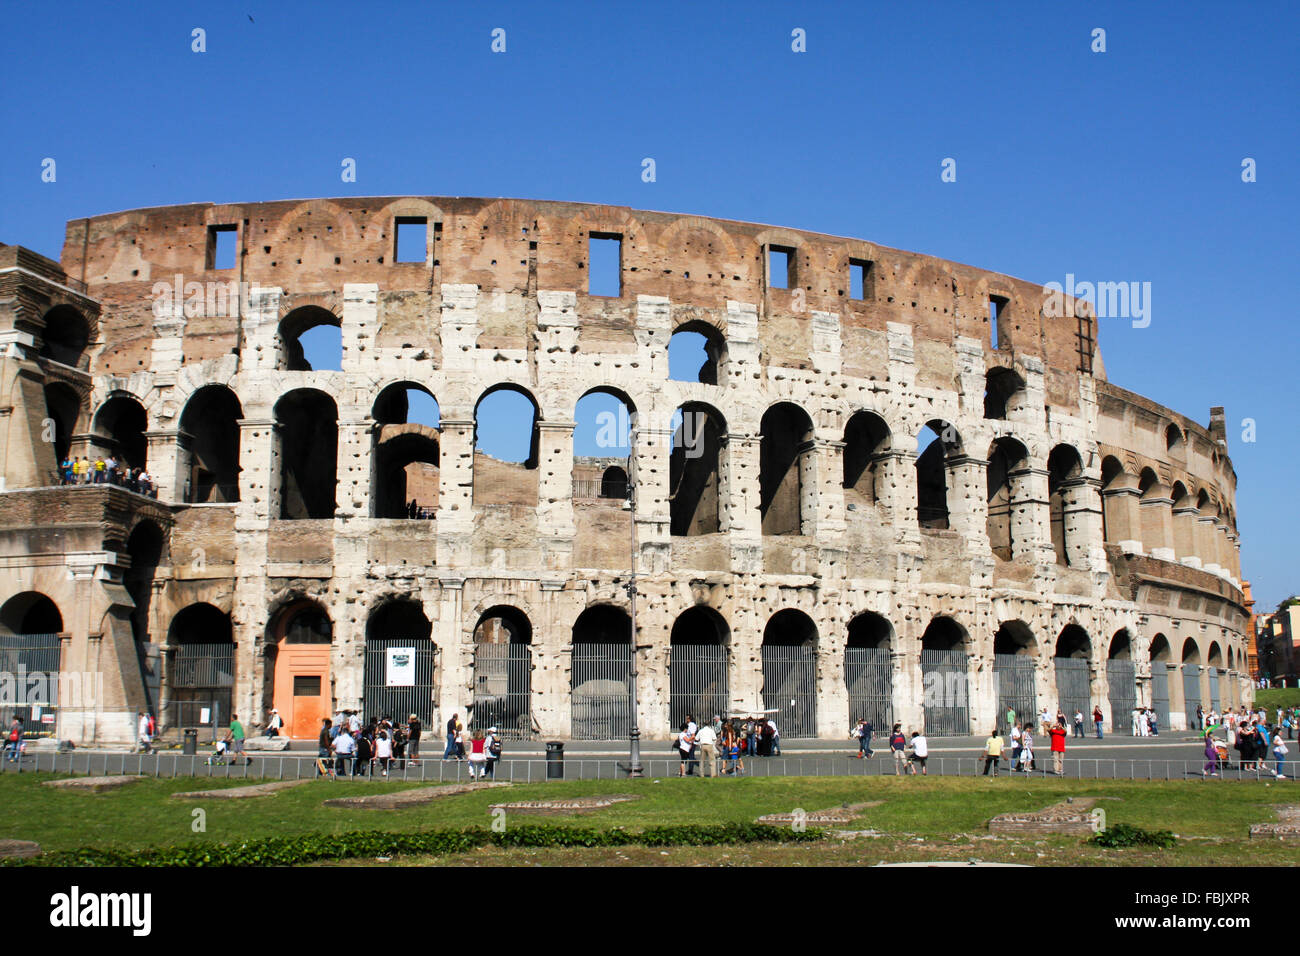 ROME, ITALY- JUNE 2, 2012: Unidentified people by Colloseum in Rome, Italy. It is most remarkable landmark of Rome and Italy. Th Stock Photo